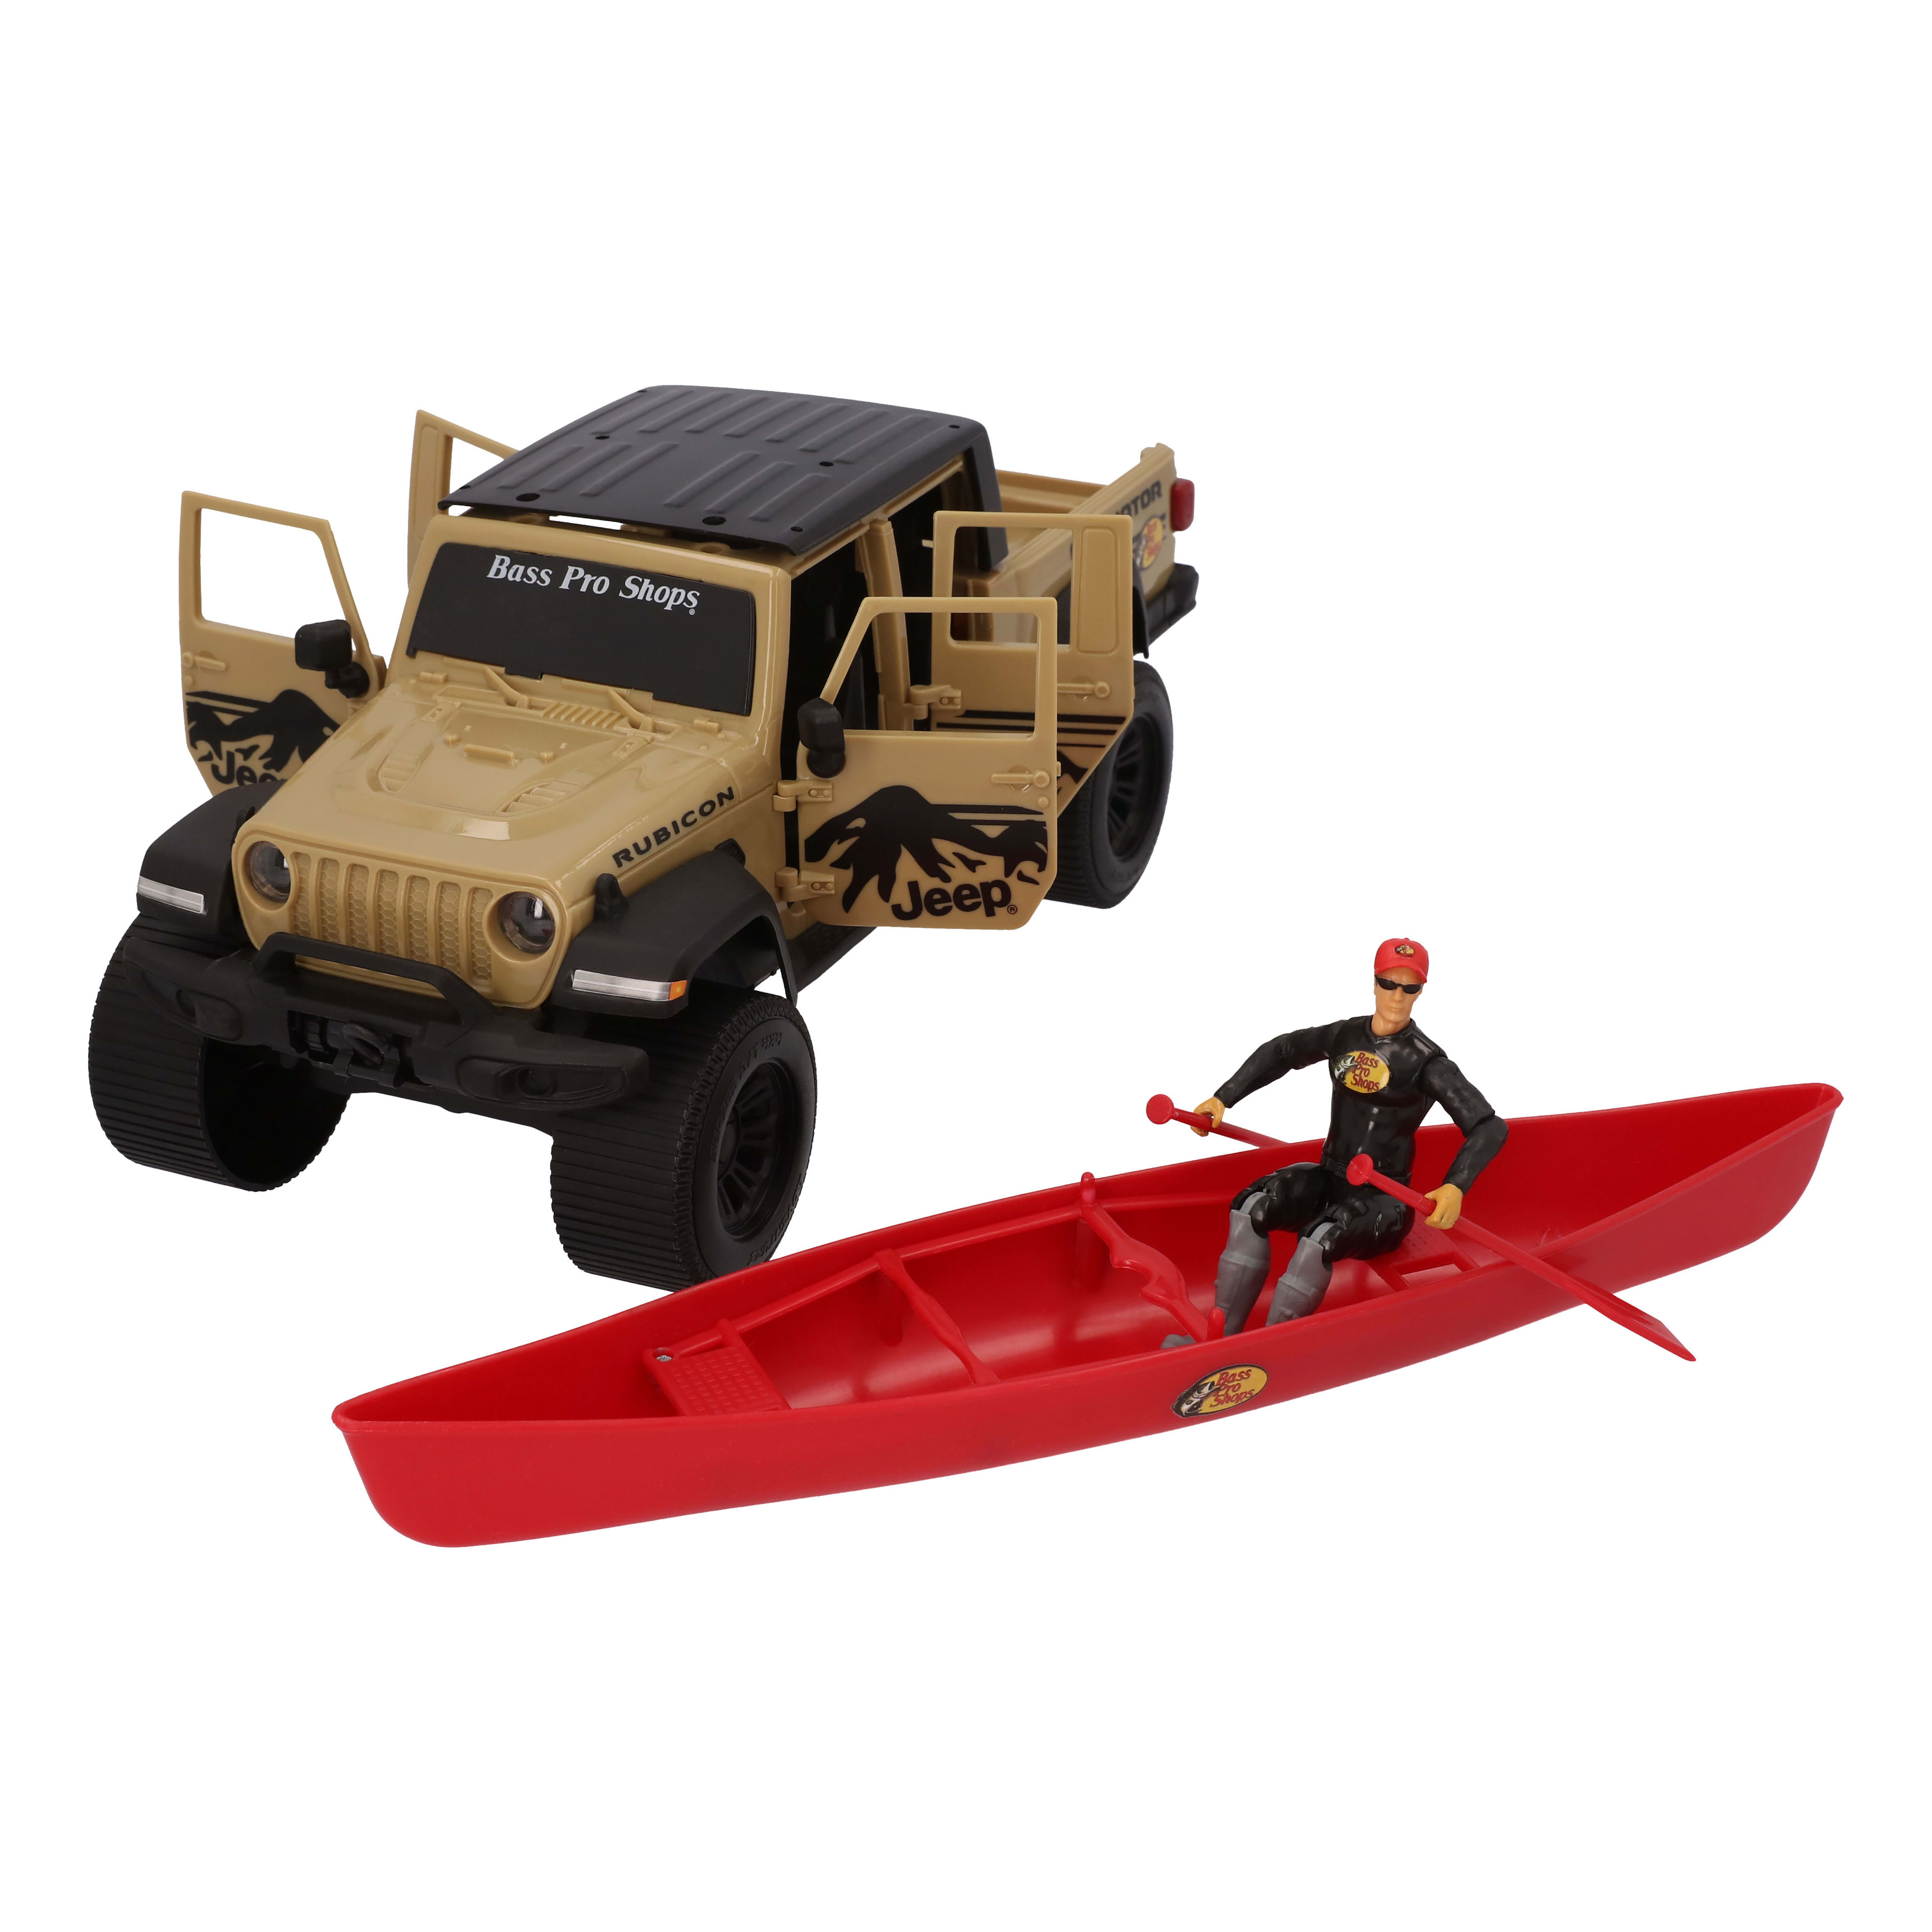 Bass Pro Shops® Jeep® Gladiator with Canoe Play Set